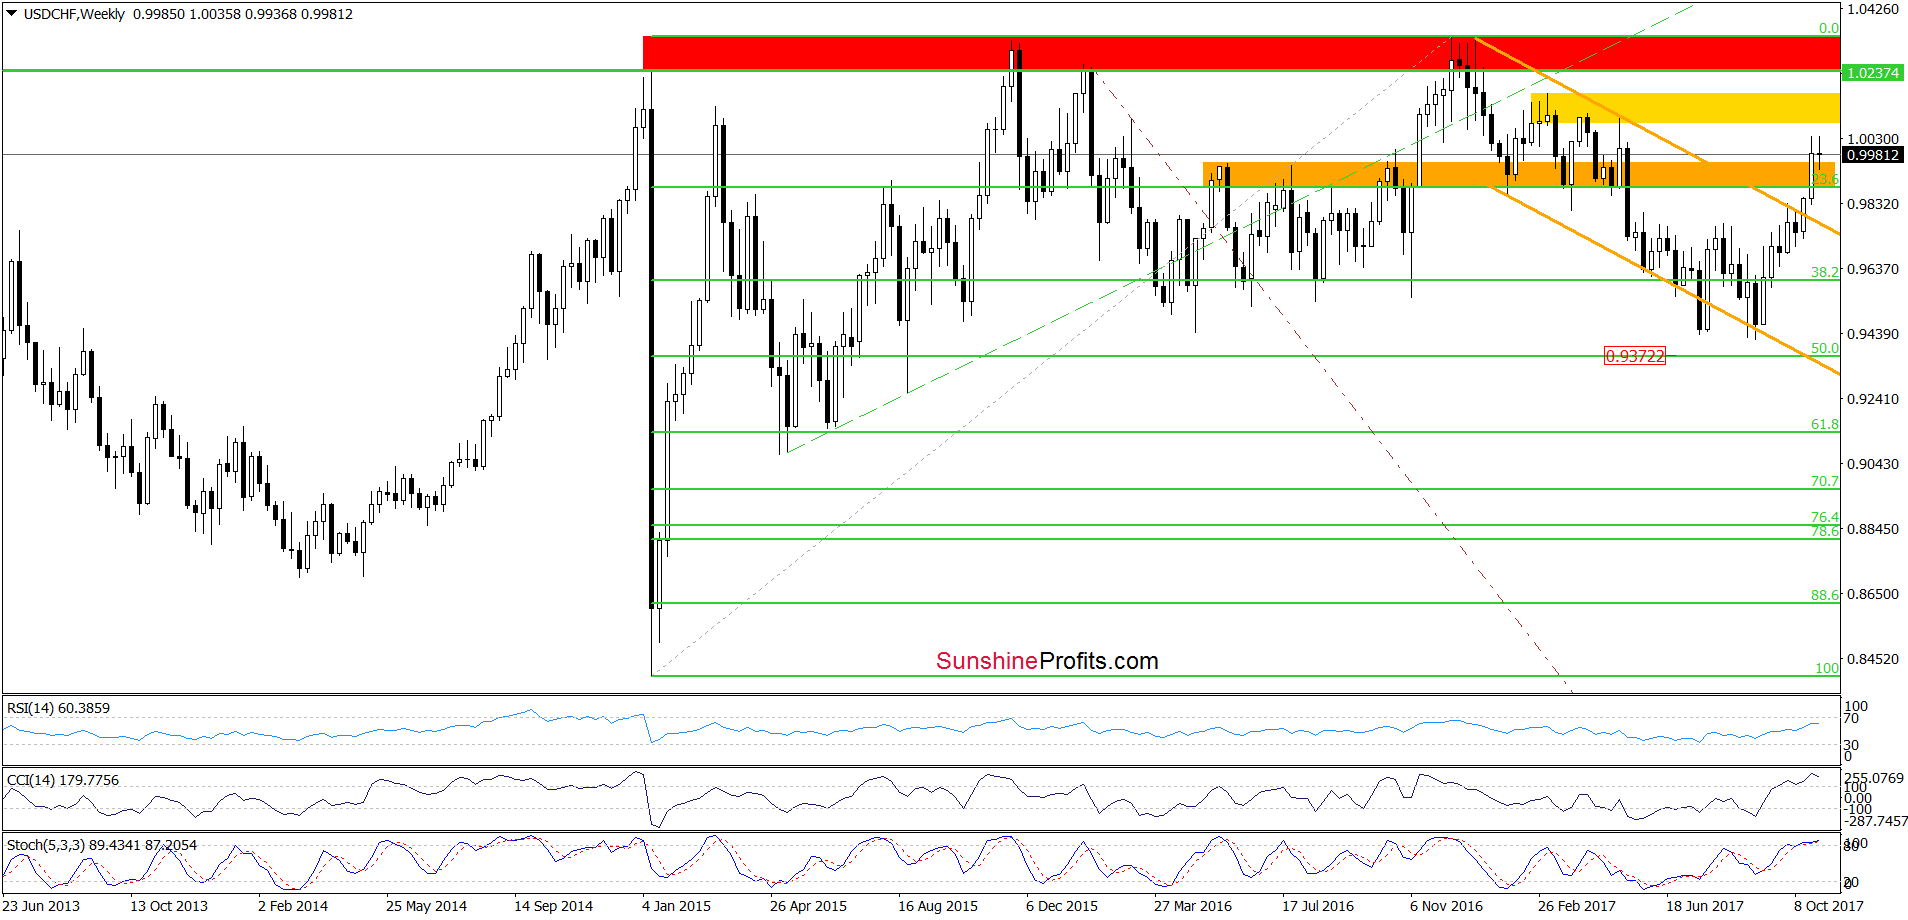 USD/CHF - the weekly chart